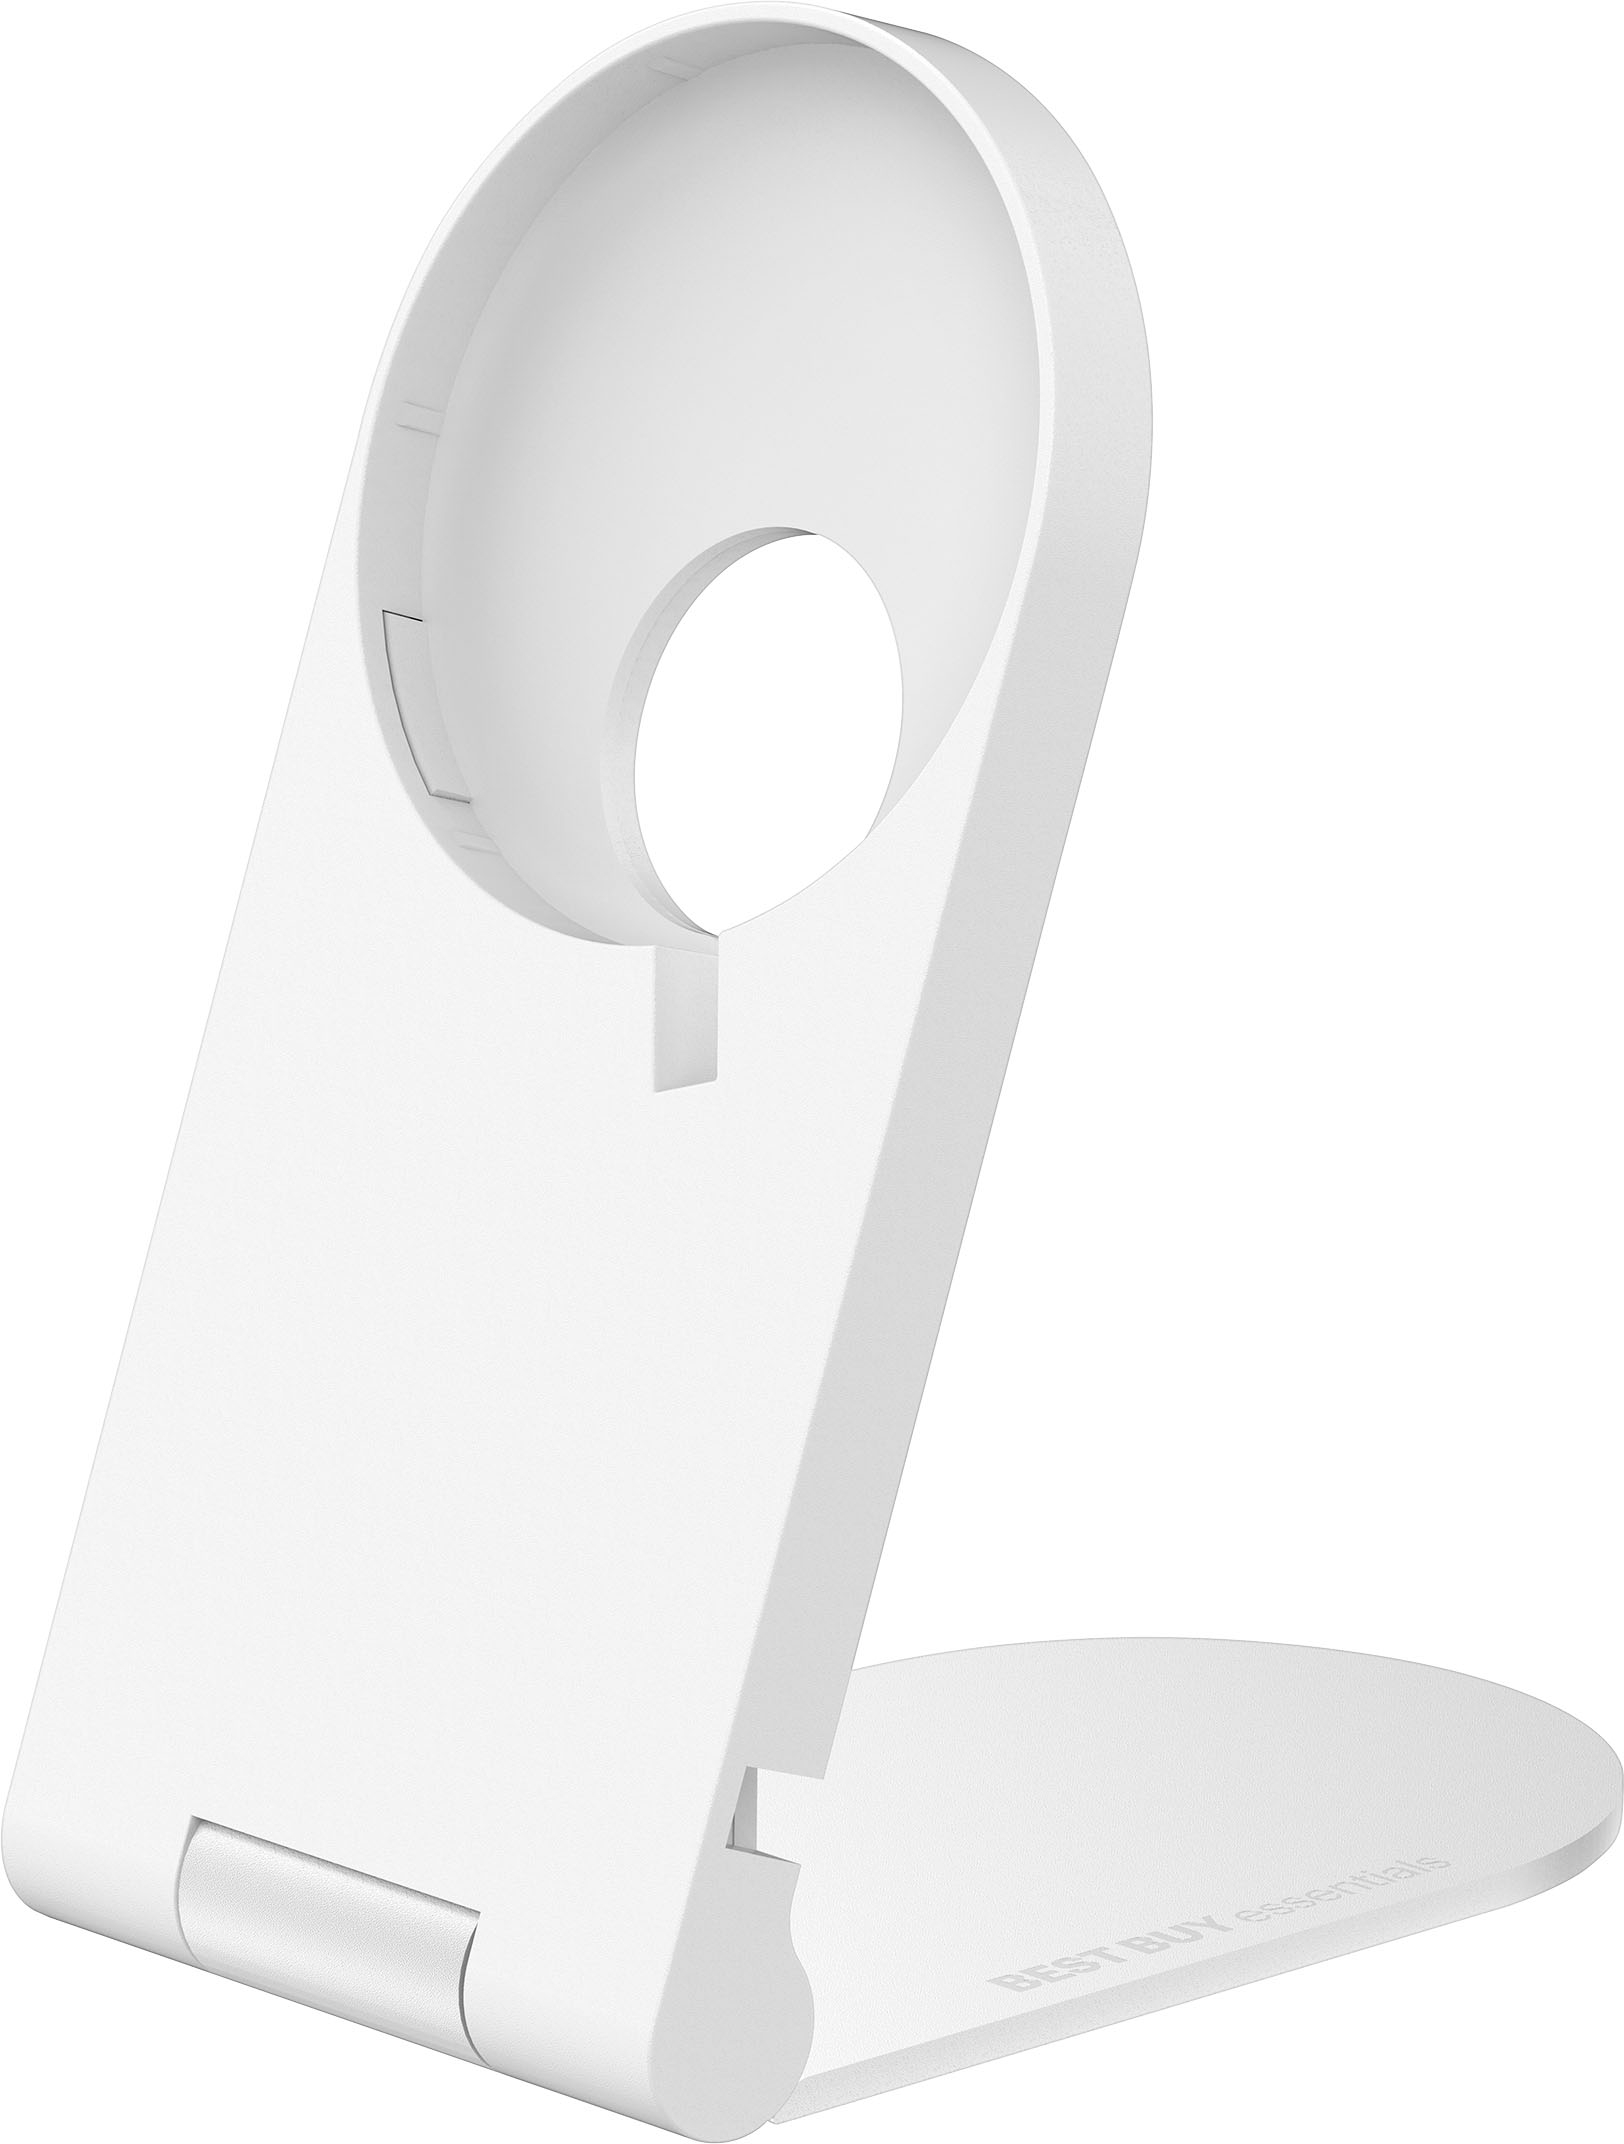 Best Buy essentials™ Foldable Stand for MagSafe Charger White BE-MCS2W23 - Best Buy